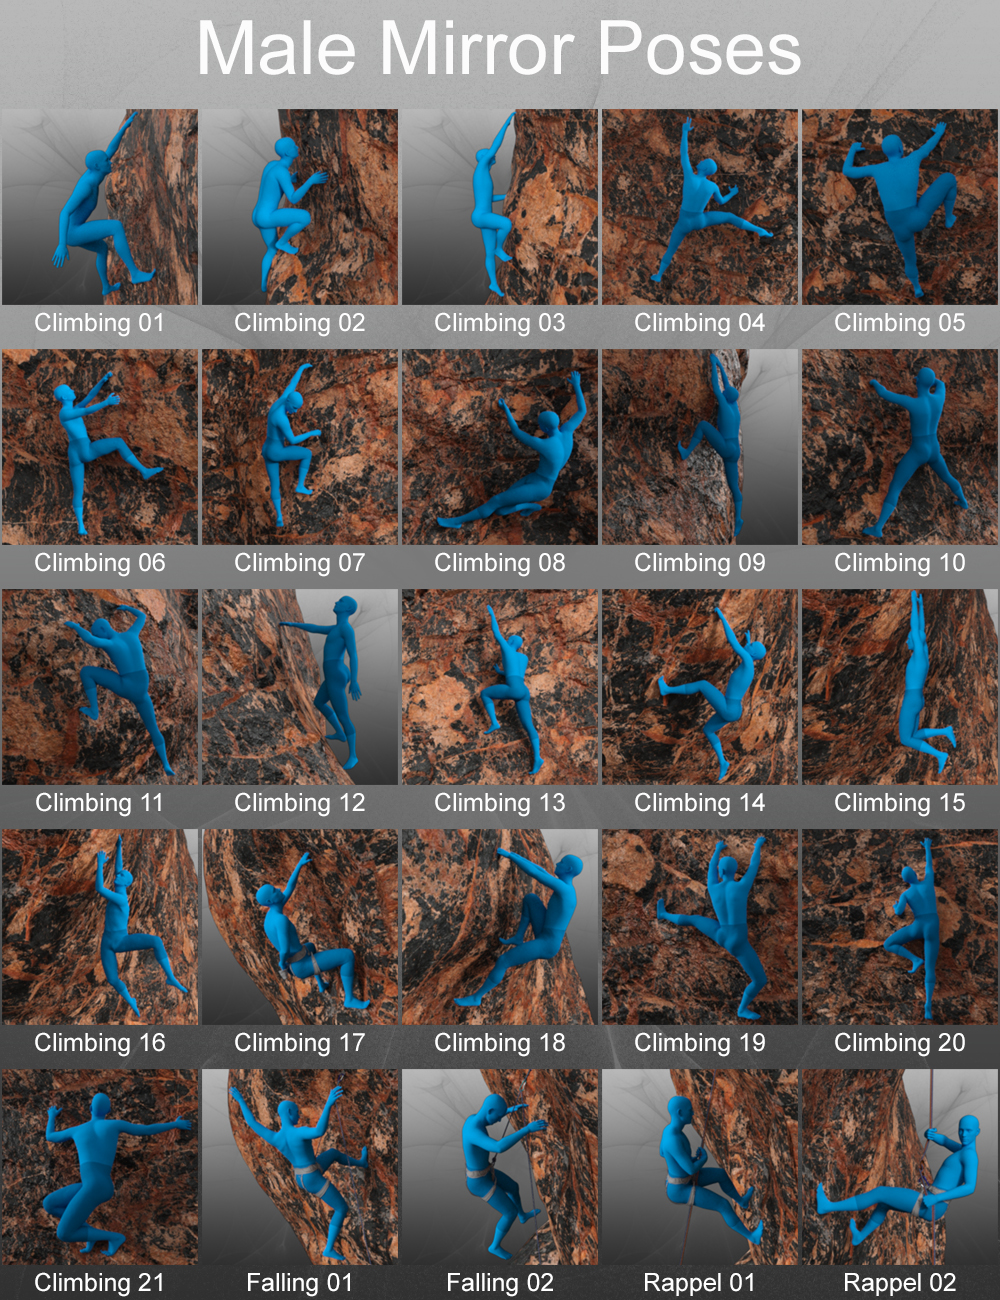 MDCH Climbing Poses for Genesis 3 and 8 by: MikeD, 3D Models by Daz 3D